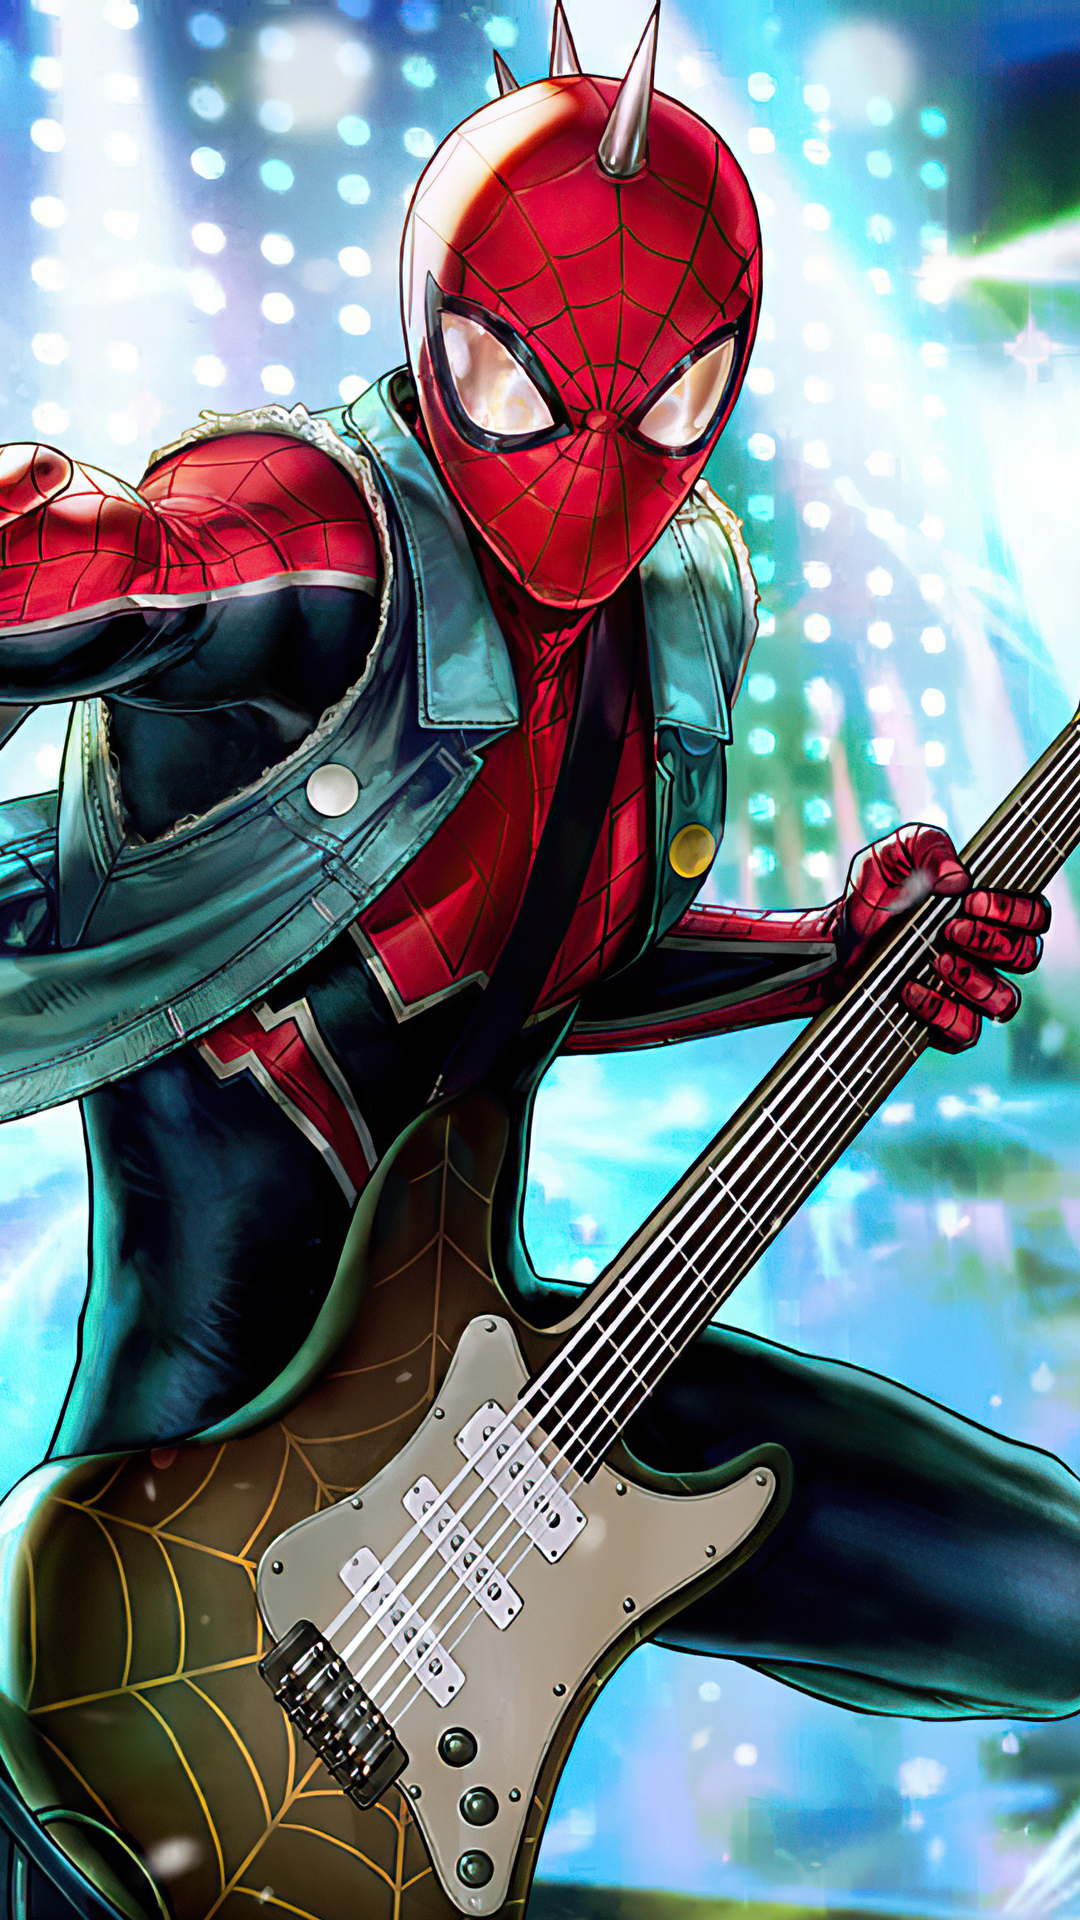 1080x1920 Spiderman Playing Guitar Iphone 7,6s,6 Plus, Pixel xl ,One Plus  3,3t,5 ,HD 4k Wallpapers,Images,Backgrounds,Photos and Pictures